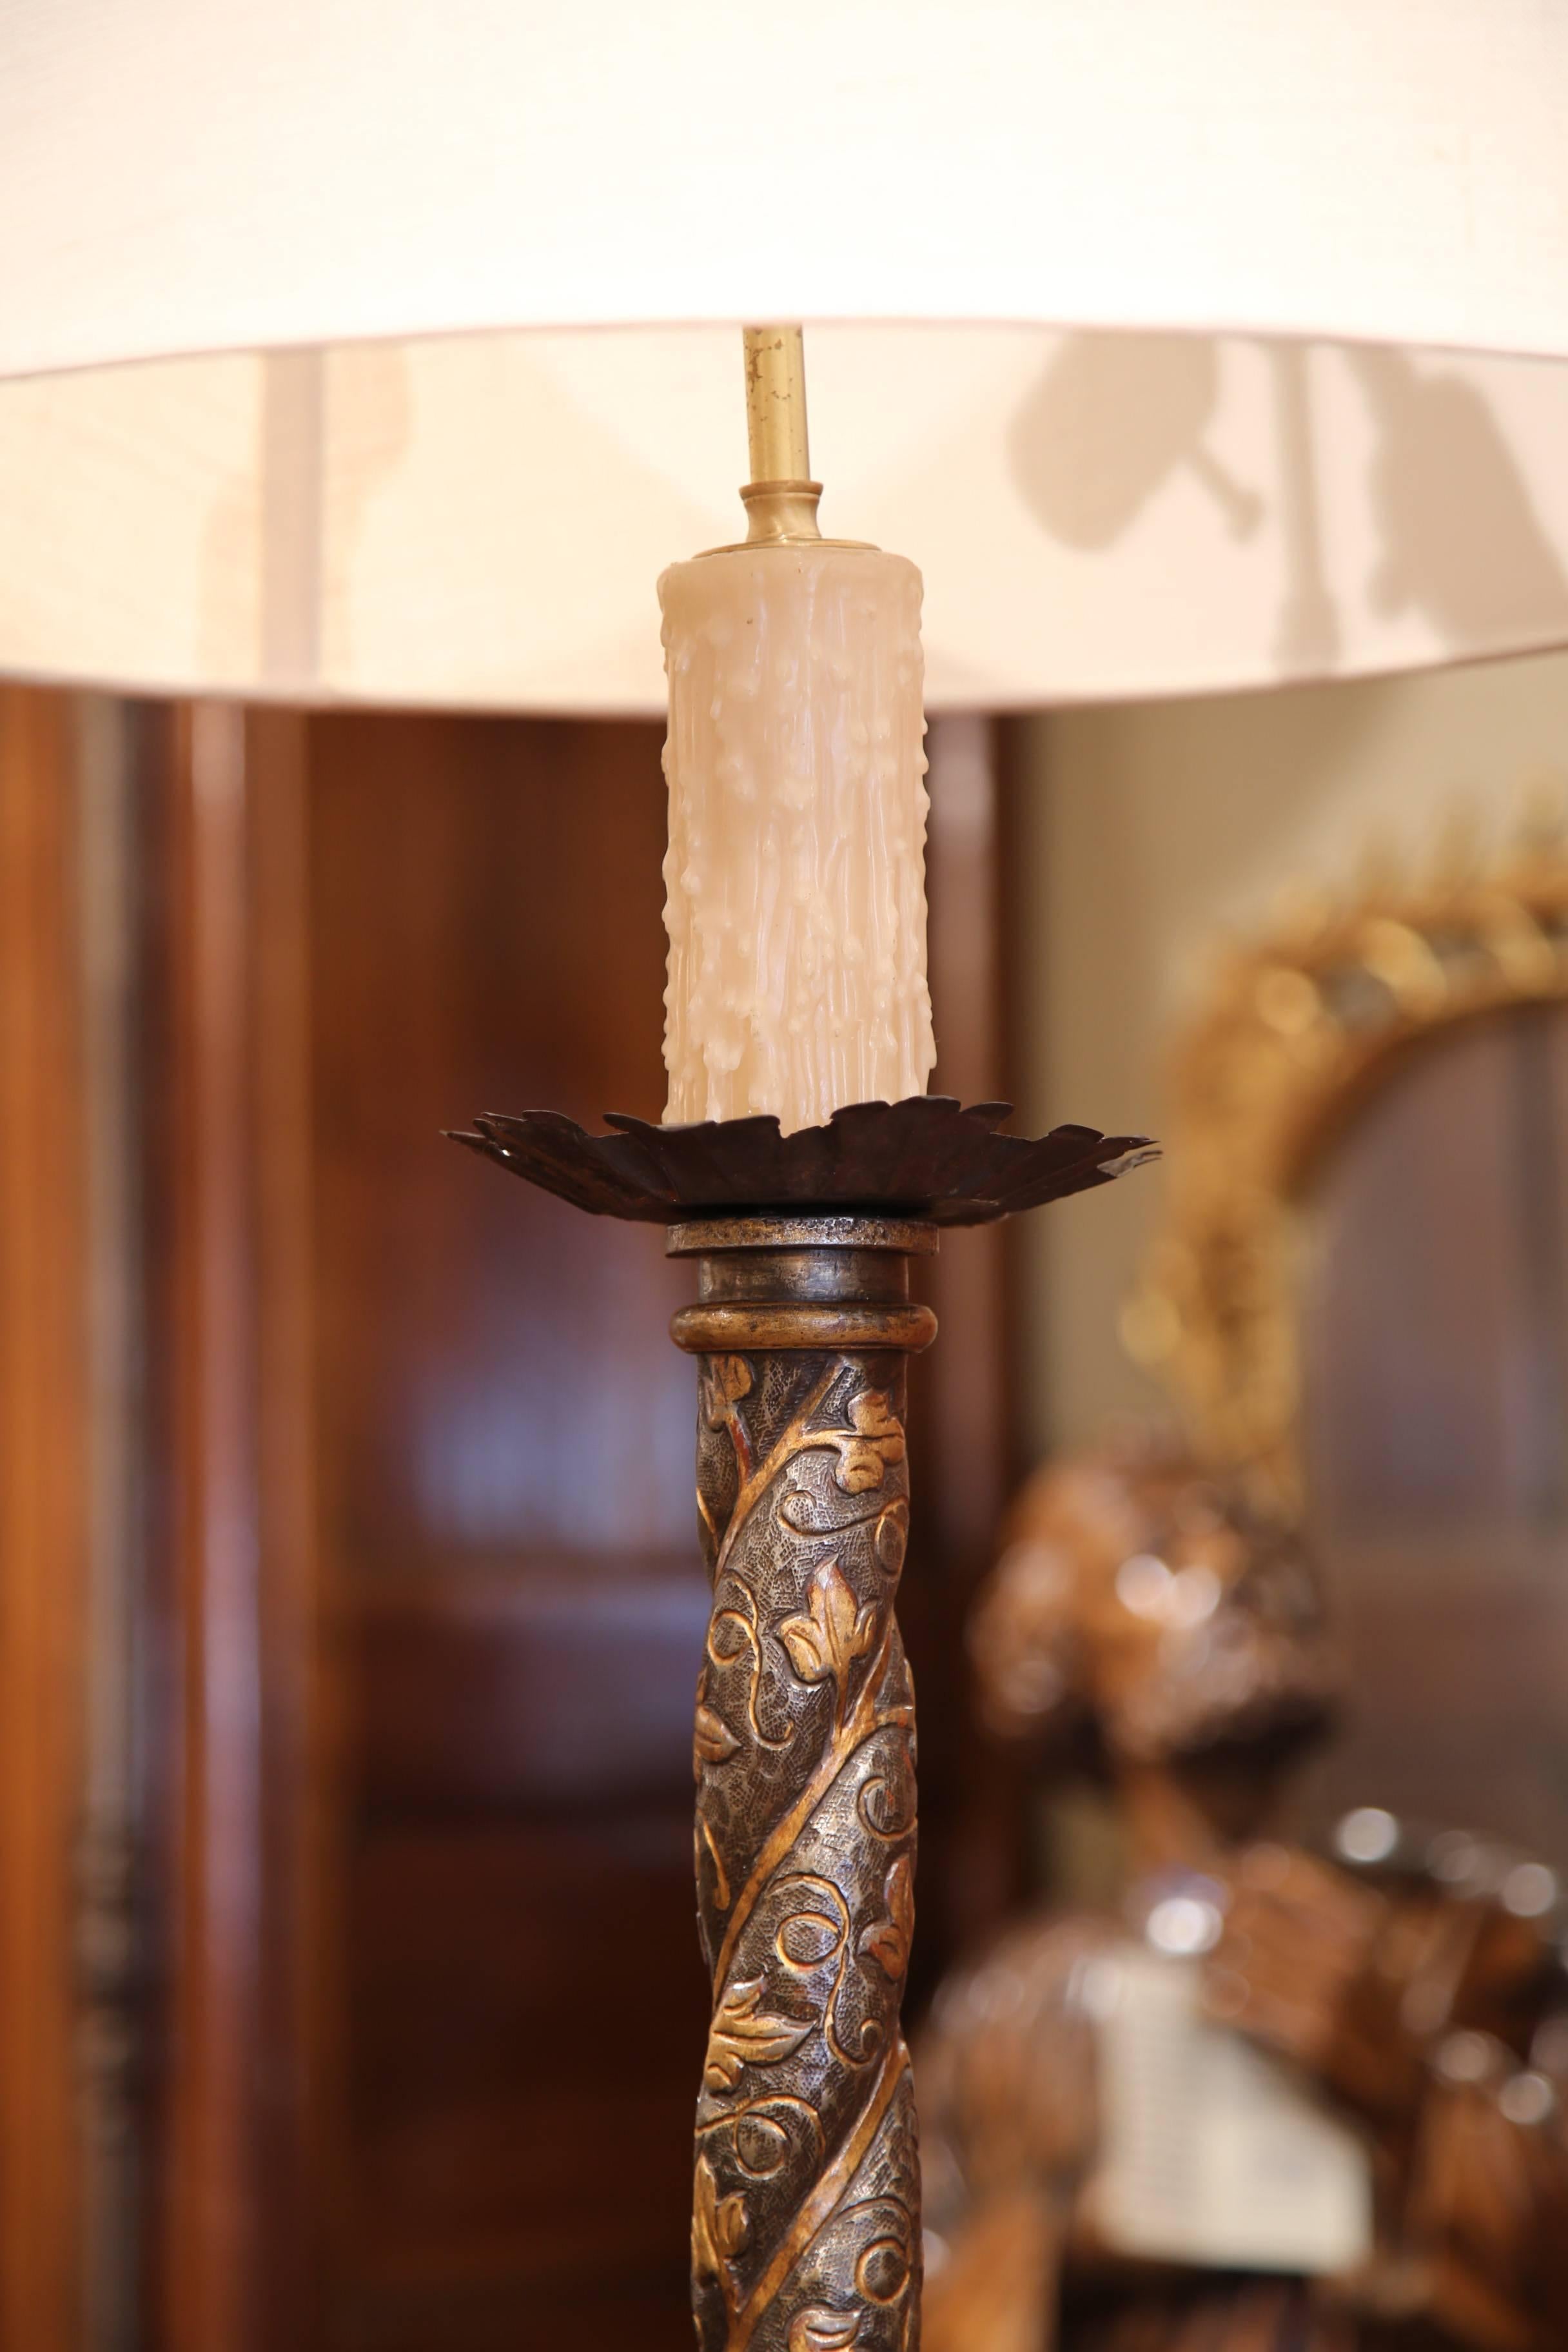 Add extra light next to your favorite reading chair in the living room or study with this elegant, antique floor lamp from Southern France, circa 1860. On the tall base, the lamp has painted and gilt flowers that are discrete but perfectly